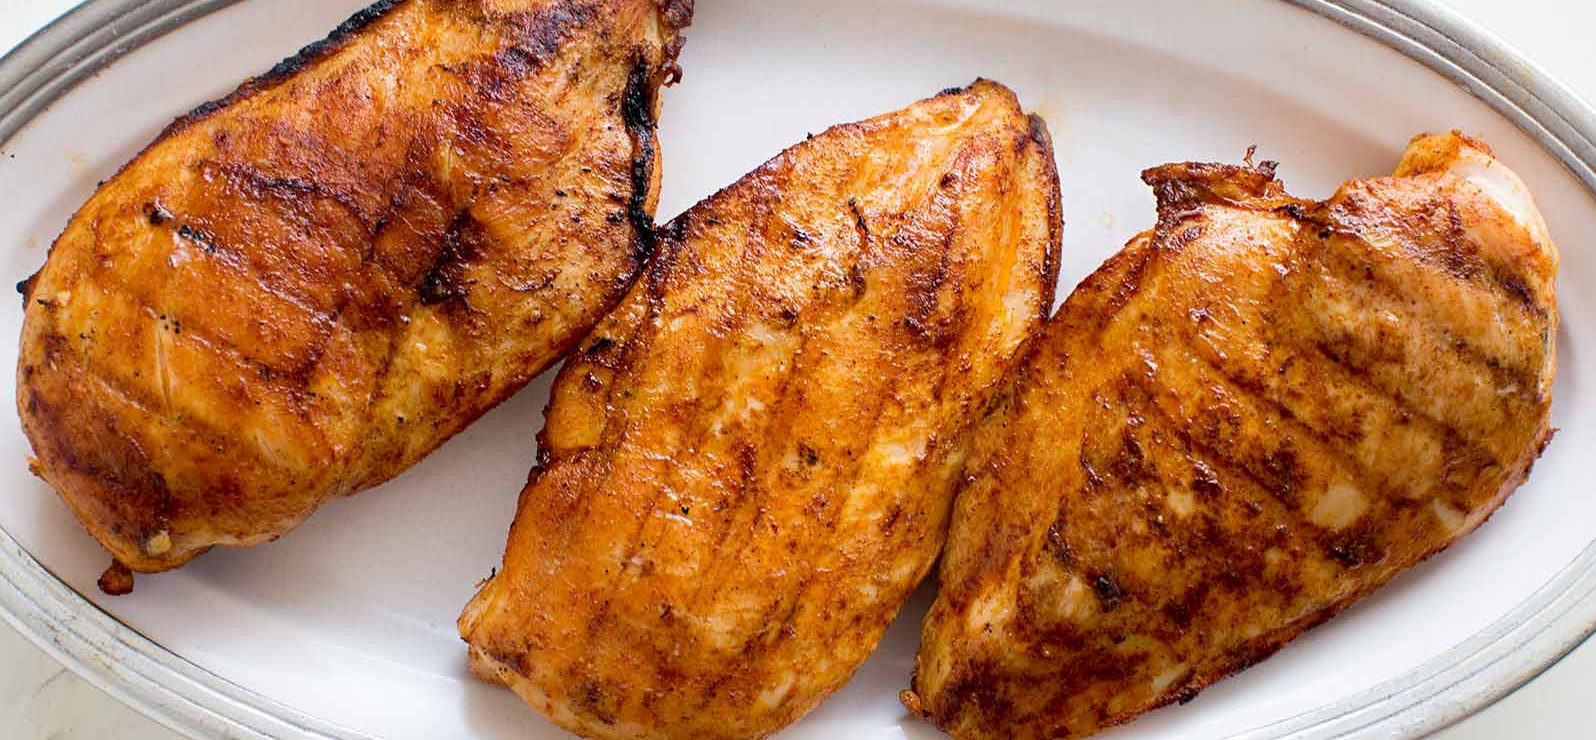 How long to bake chicken breast